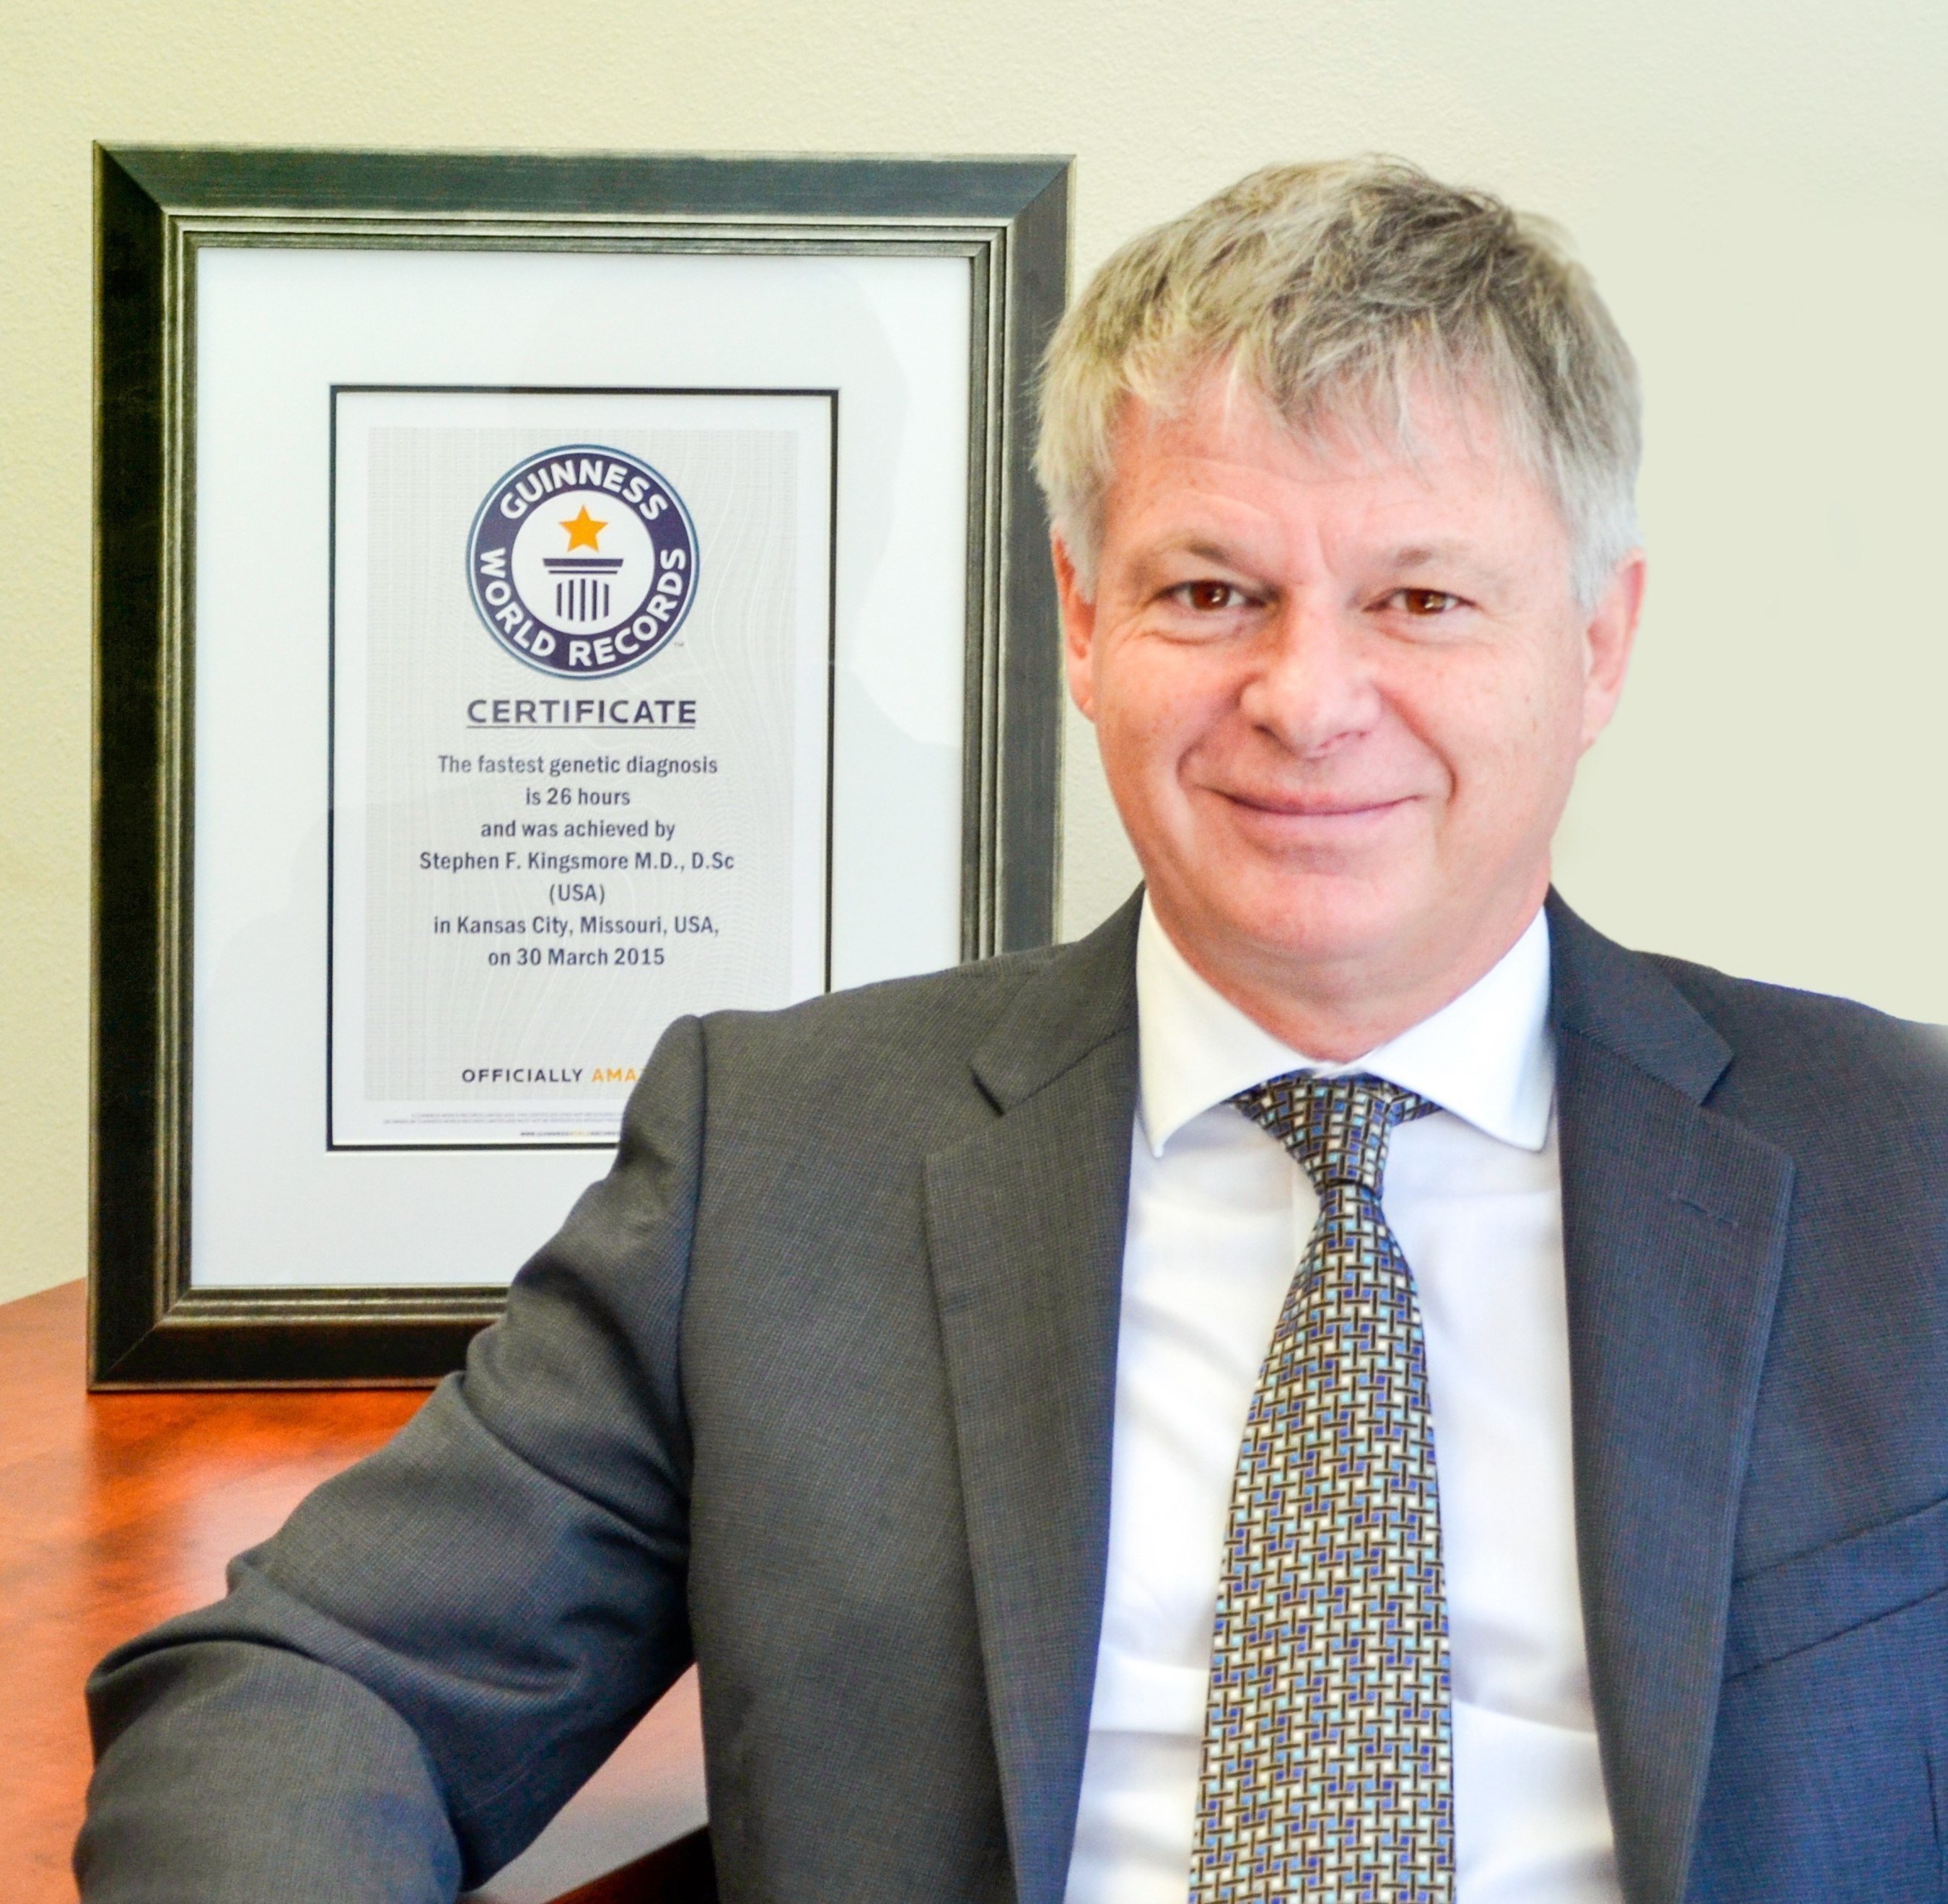 Stephen Kingsmore, M.D., D.Sc., President & CEO, Rady Children's Institute for Genomic Medicine, holds the Guinness World Record title for Fastest Genetic Diagnosis.